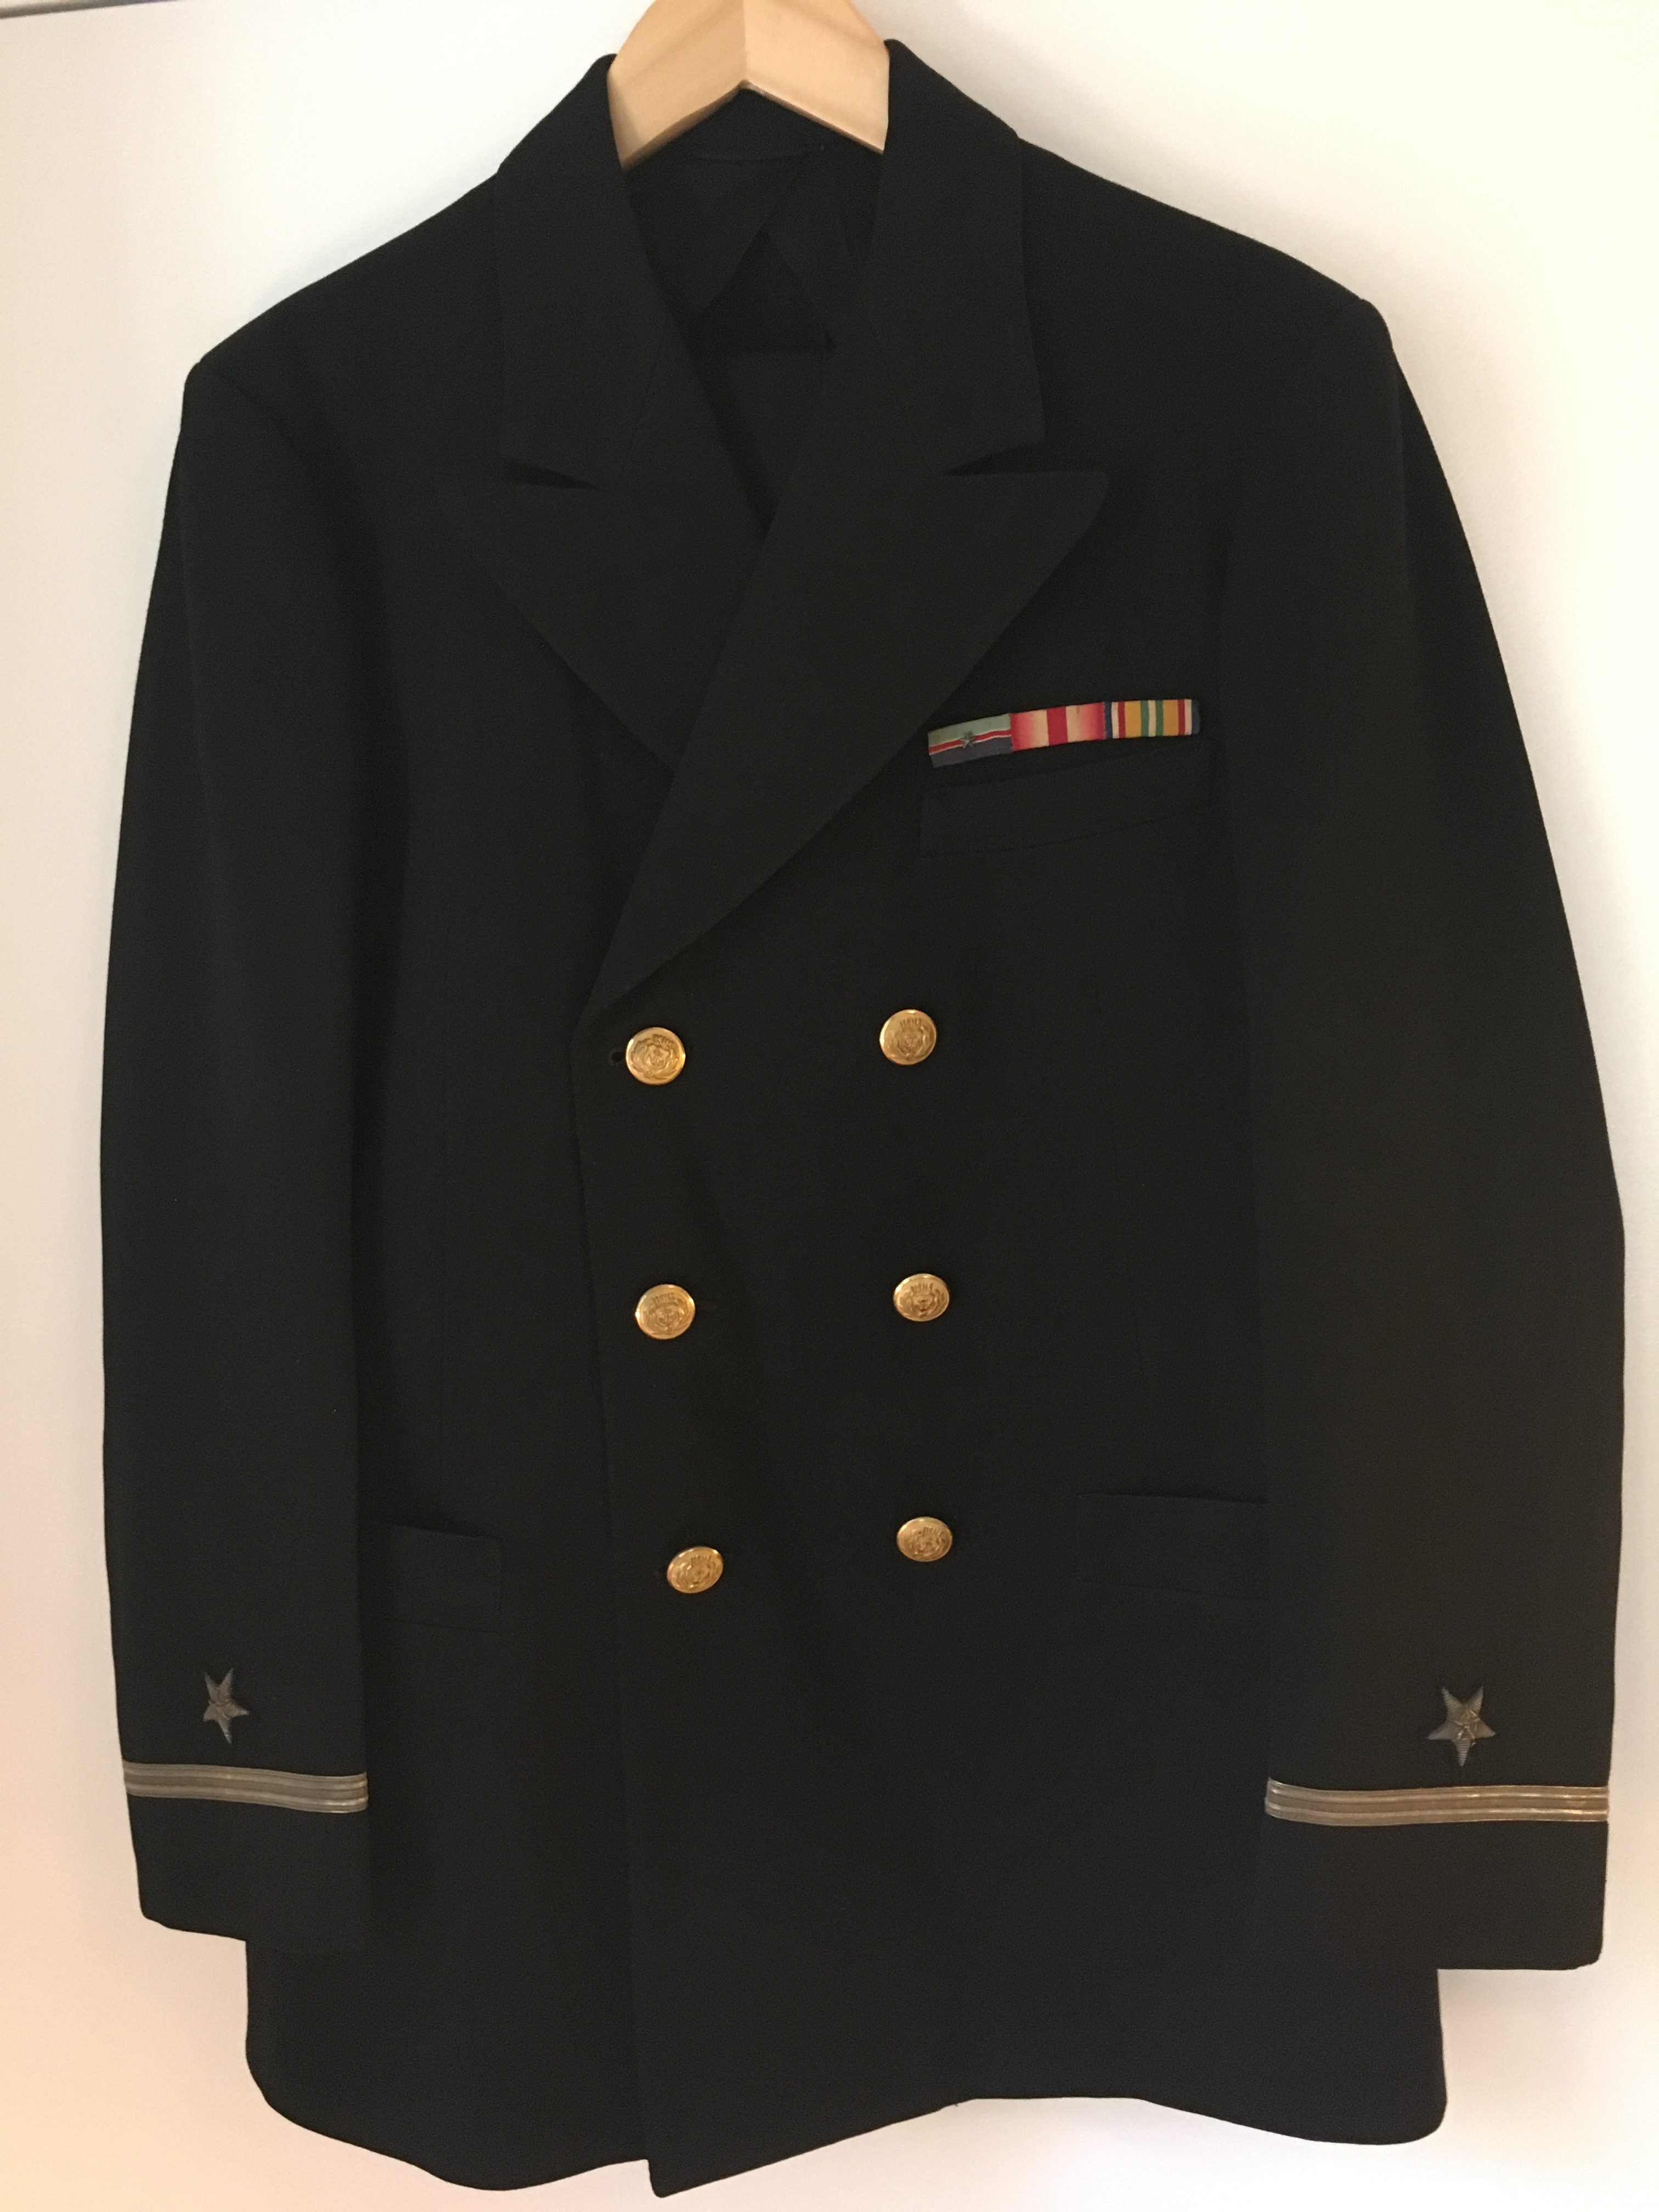 usmma uniforms: 1944-1946 set – a collection of writing